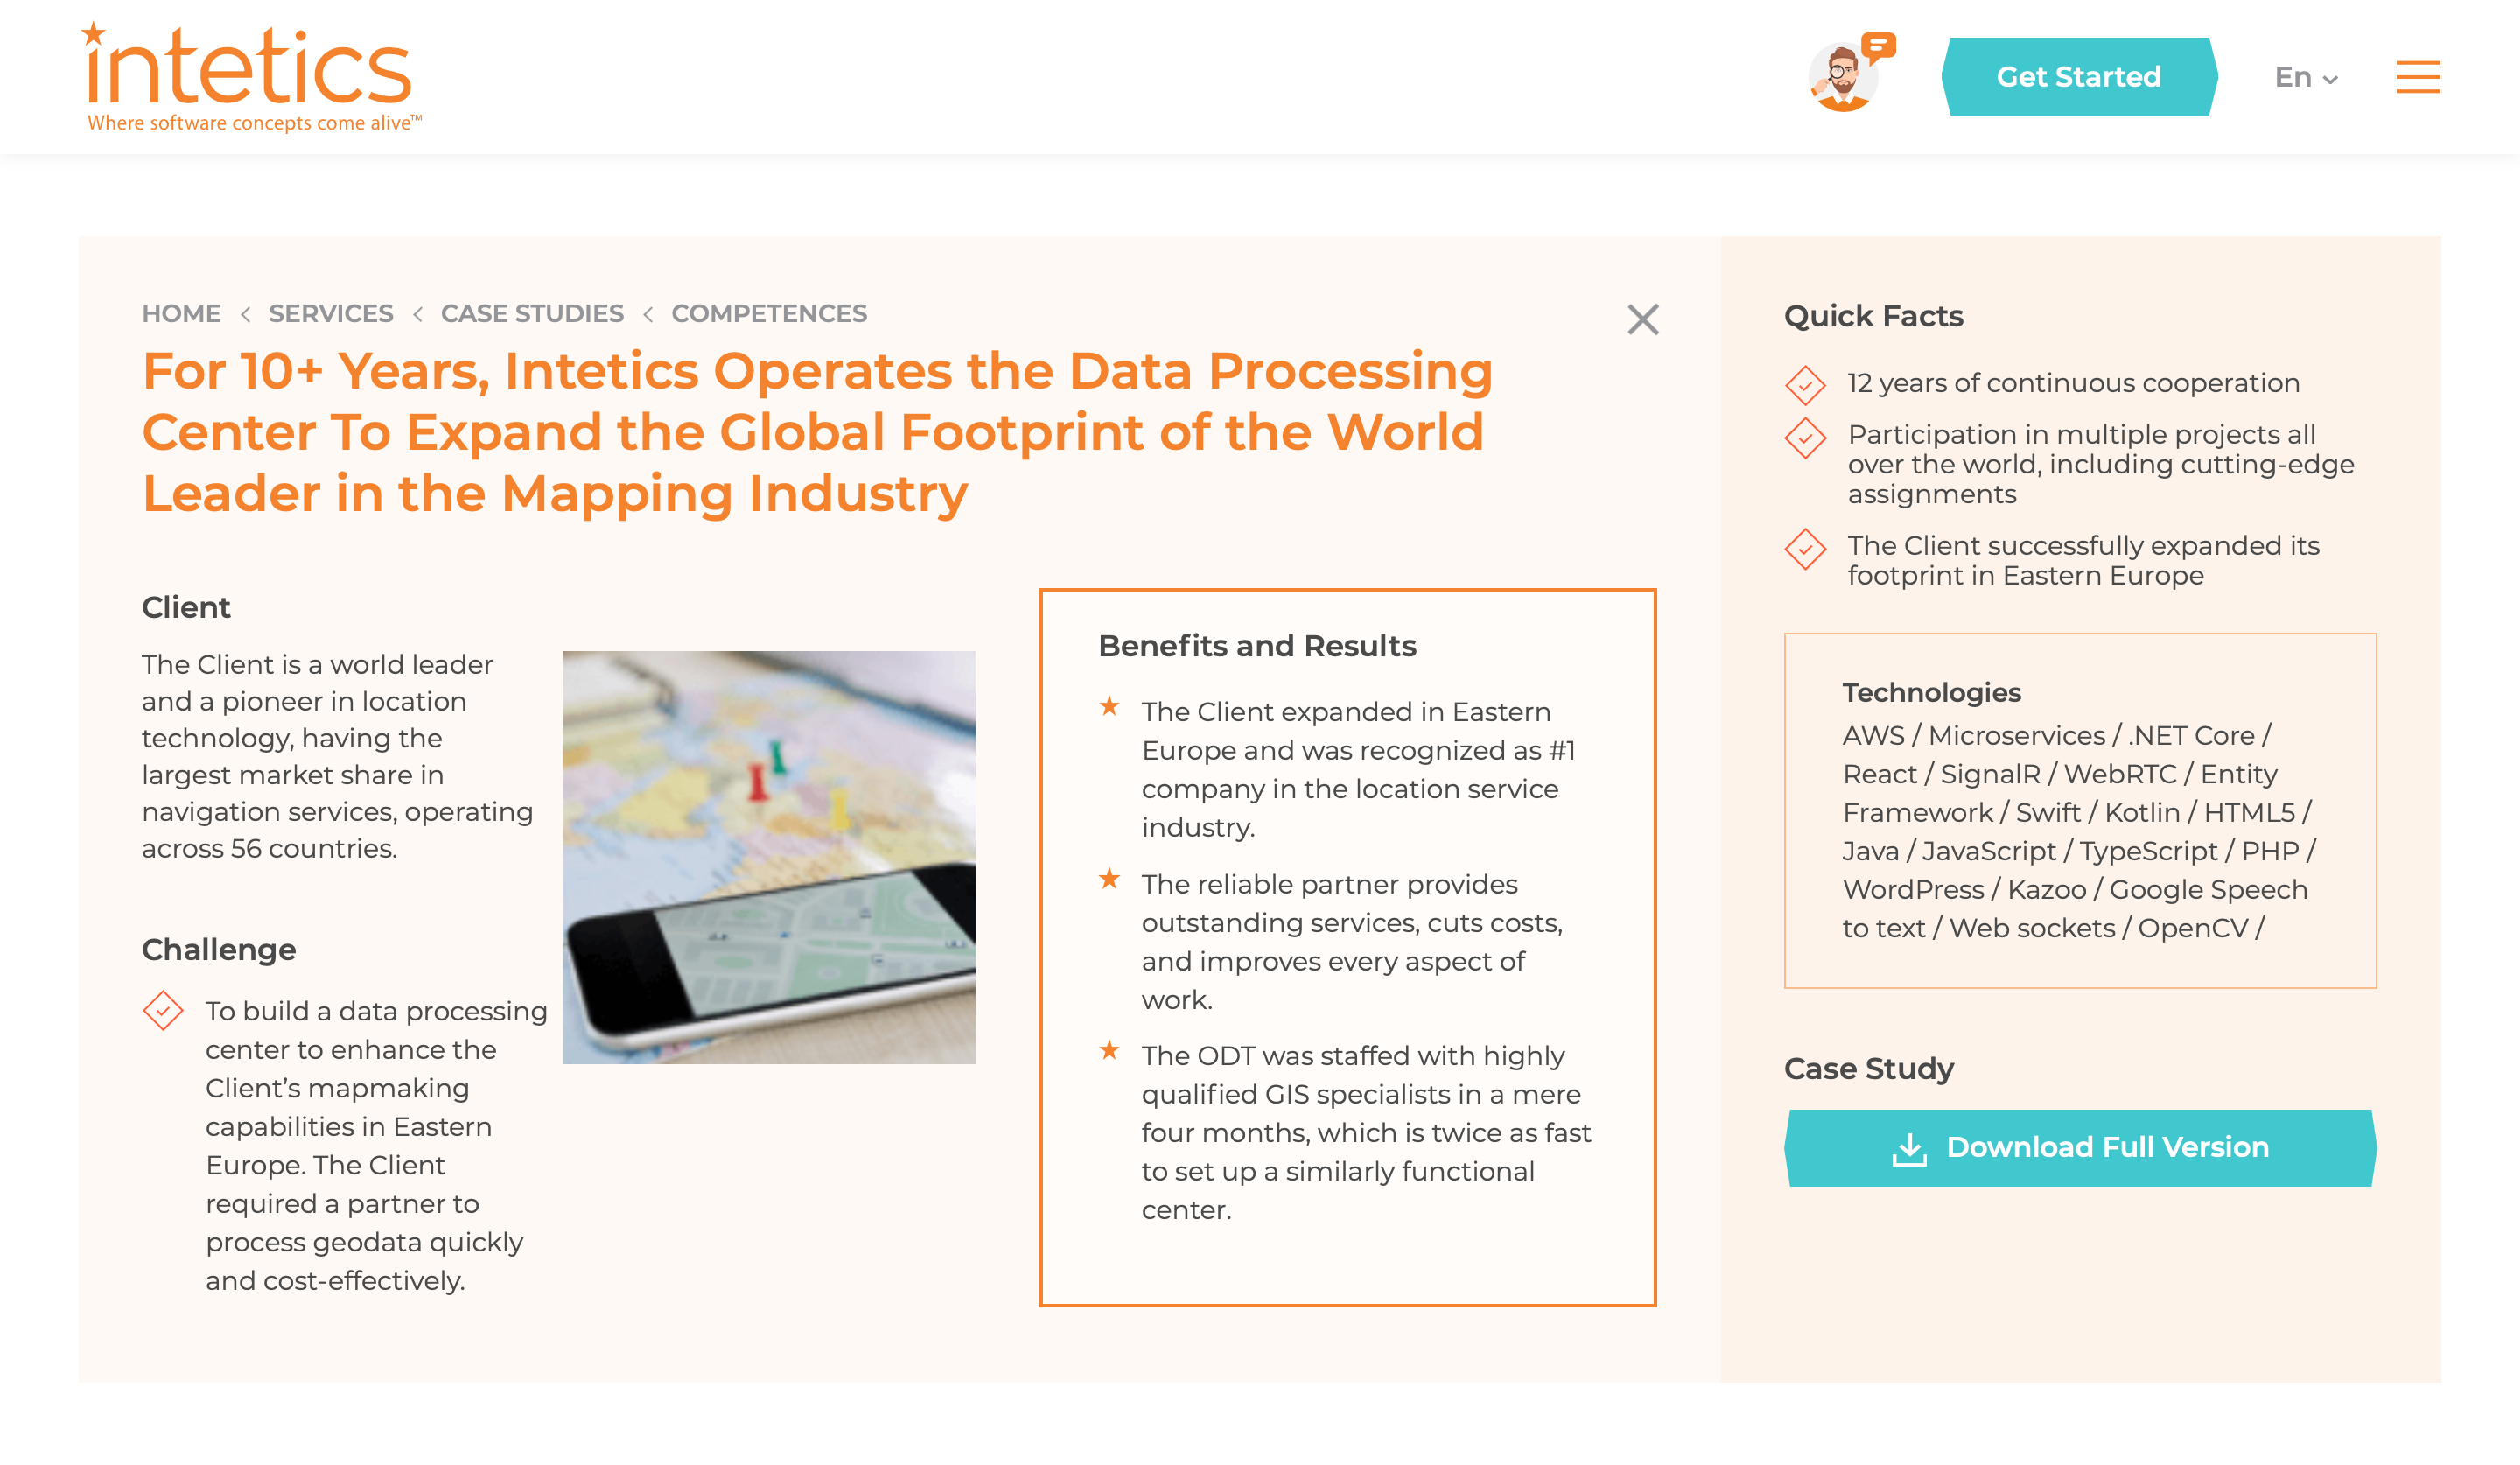 For 10 Years Intetics Operates the Data Processing Center To Expand the Global Footprint of the World Leader in the Mapping Industry